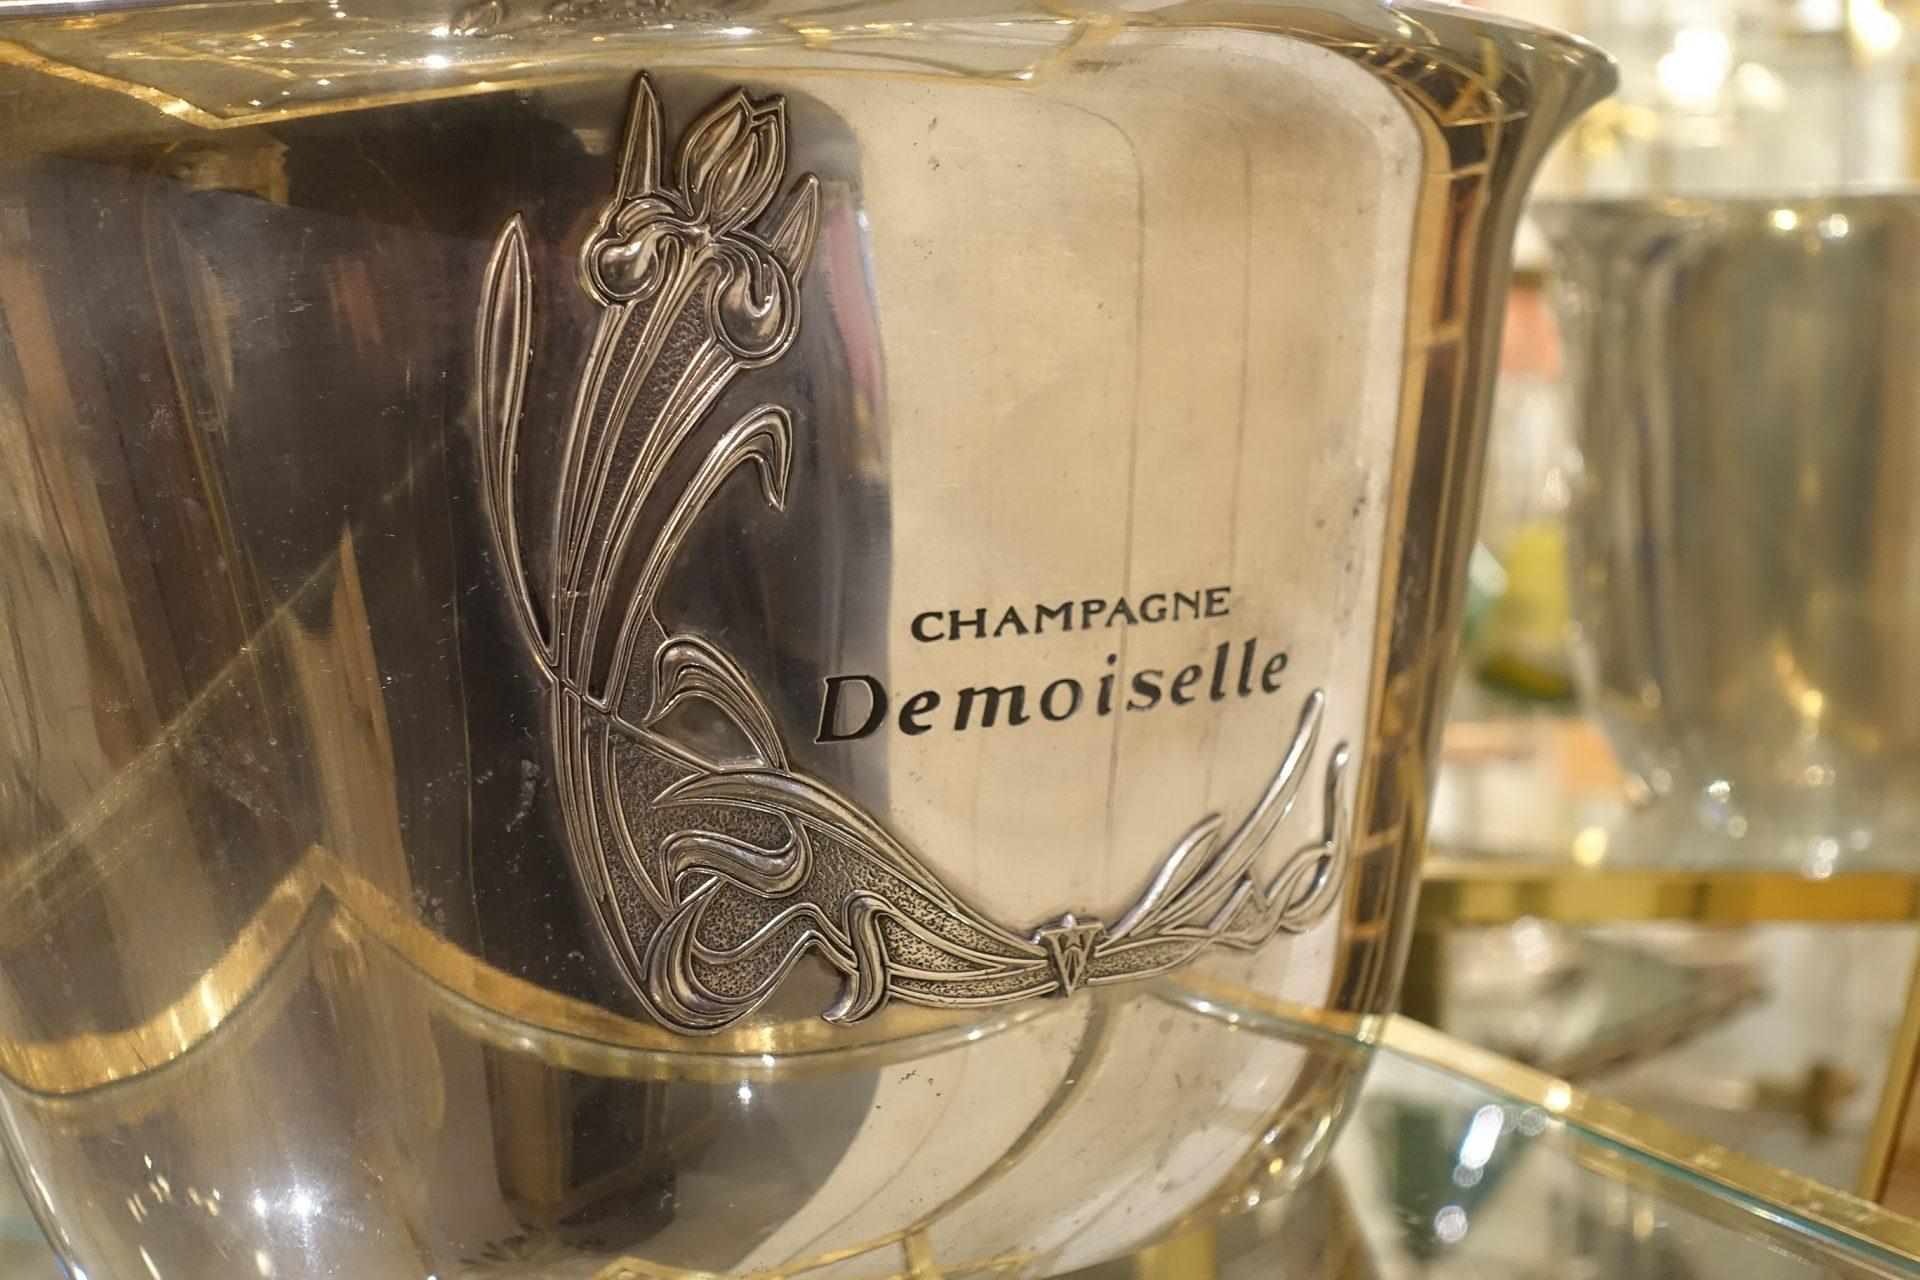 Fabulous and seldom seen champagne / wine cooler, originally used at hotels / restaurants. Holds 5-6 bottles, and is characterized by the Champagne Demoiselle markings, and its lovely Art Nouveau floral motif of an iris. Demoiselle champagne is